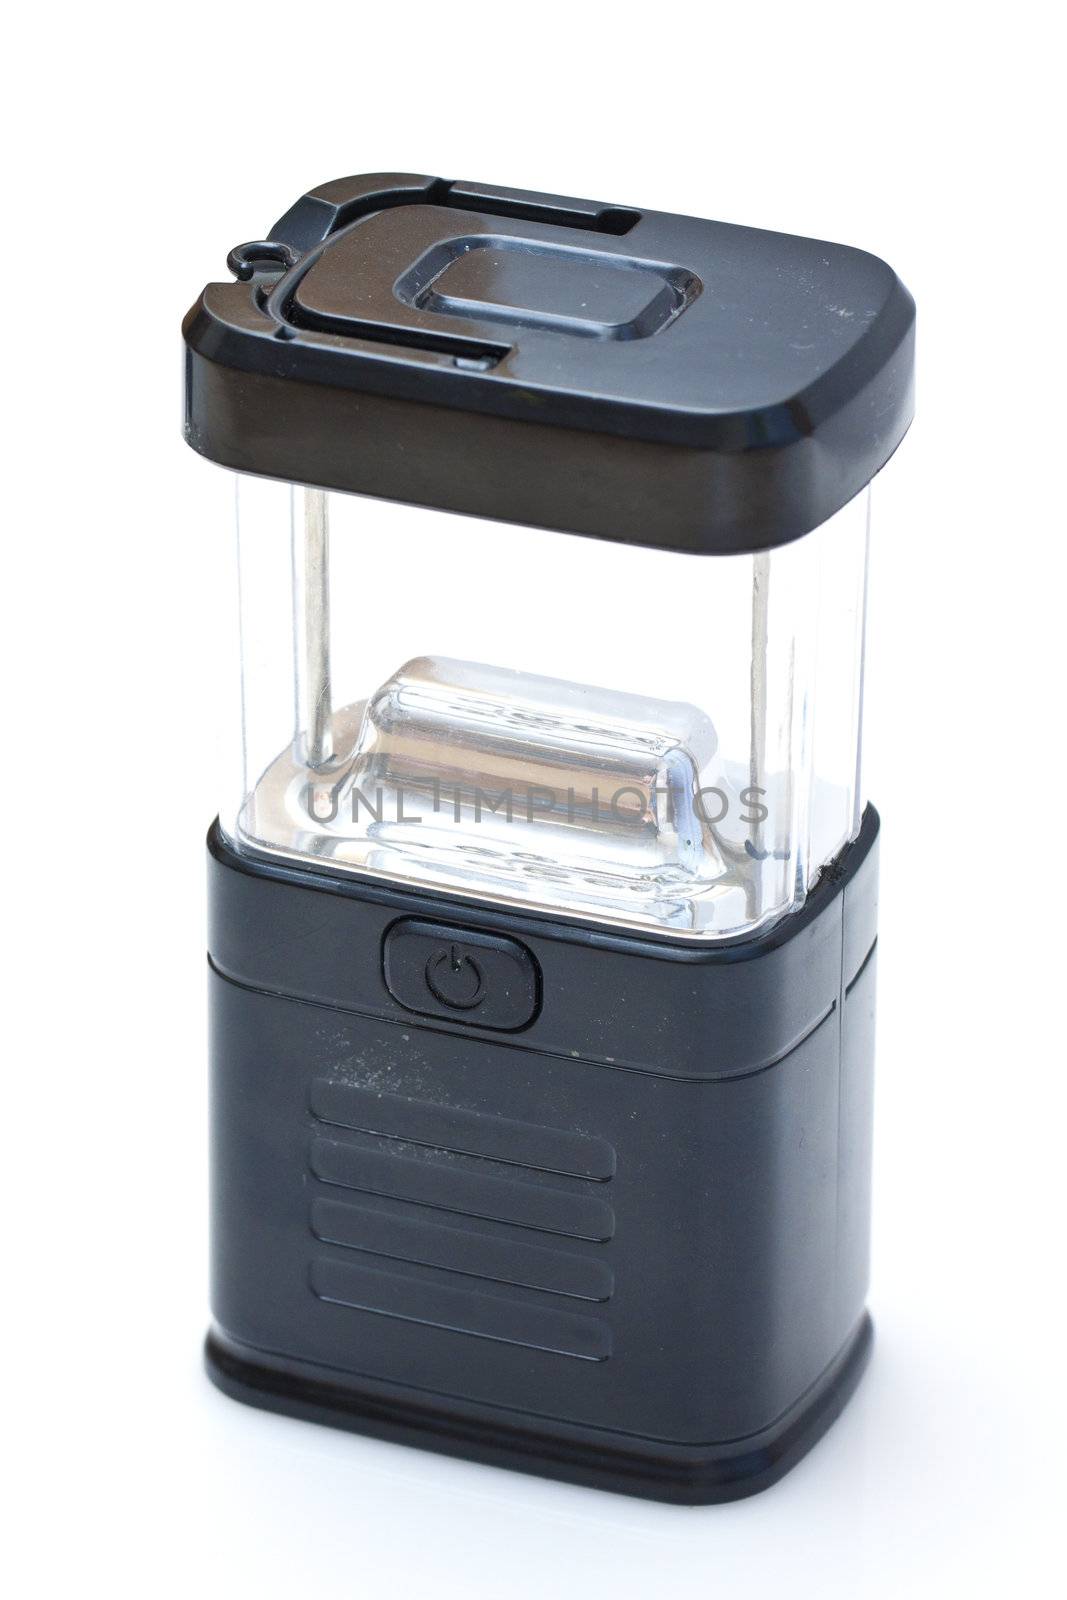 Black lamp for camping use